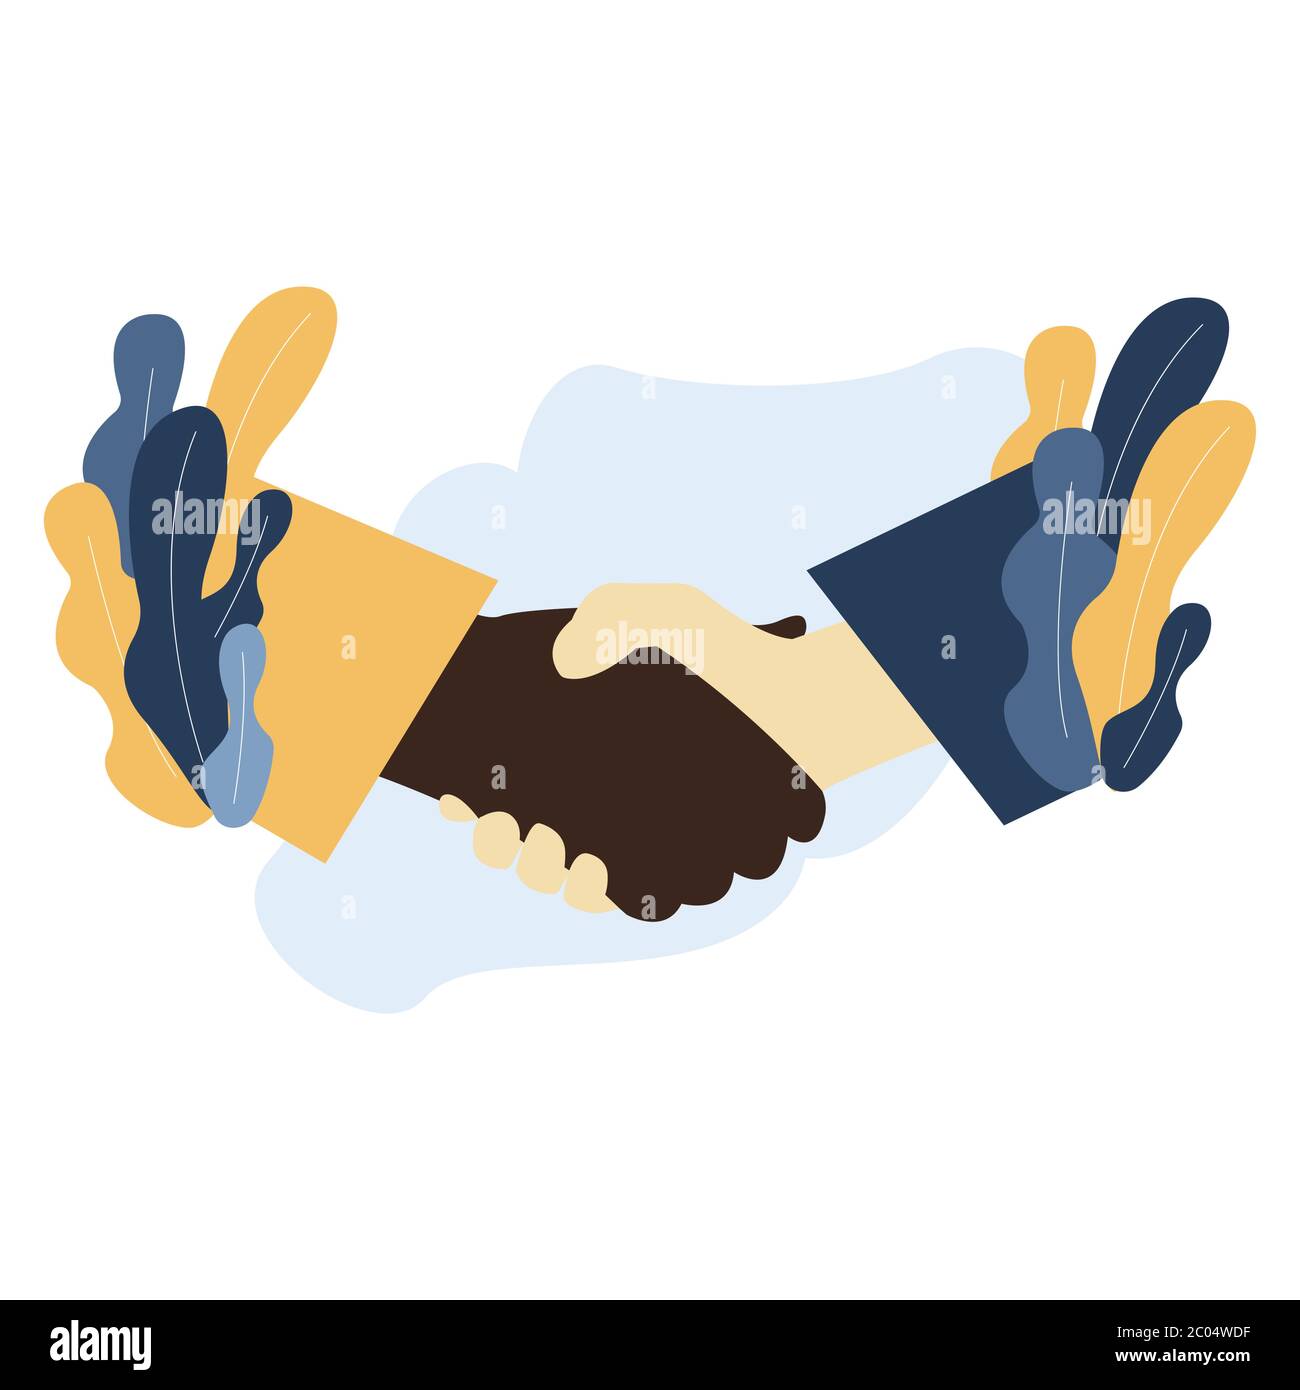 White And Black American People Shaking Hands Handshake Friendship Or Success Agreement Stop Racism 2C04WDF 